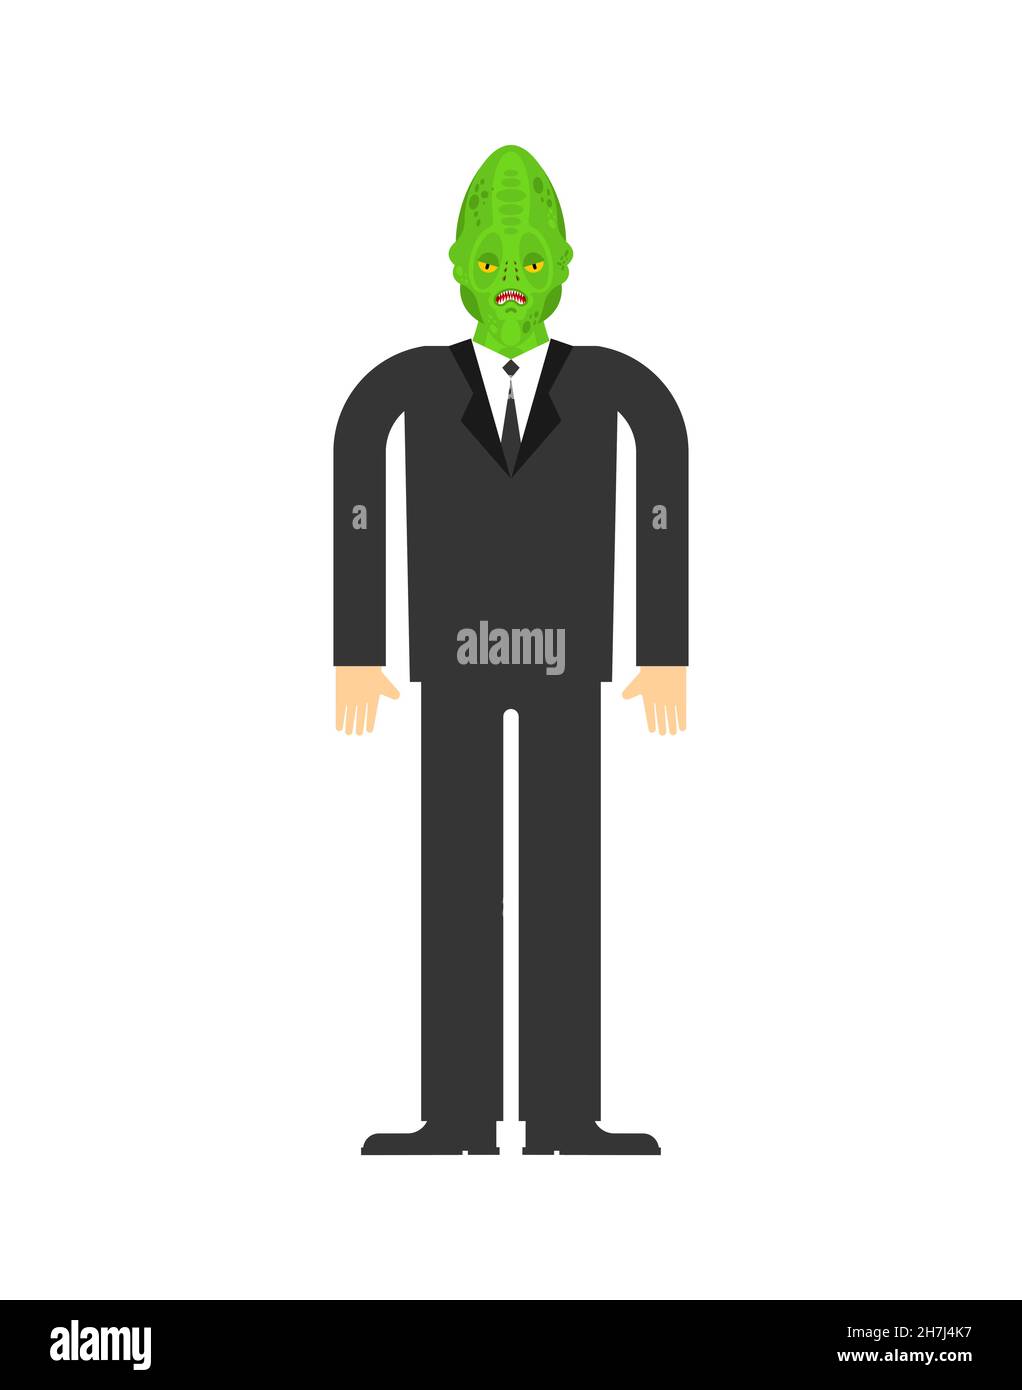 Reptilian in human form. Alien land invaders. Reptilian conspiracy theory. reptiloid humanoid beings from another planet with green skin. theory secre Stock Vector